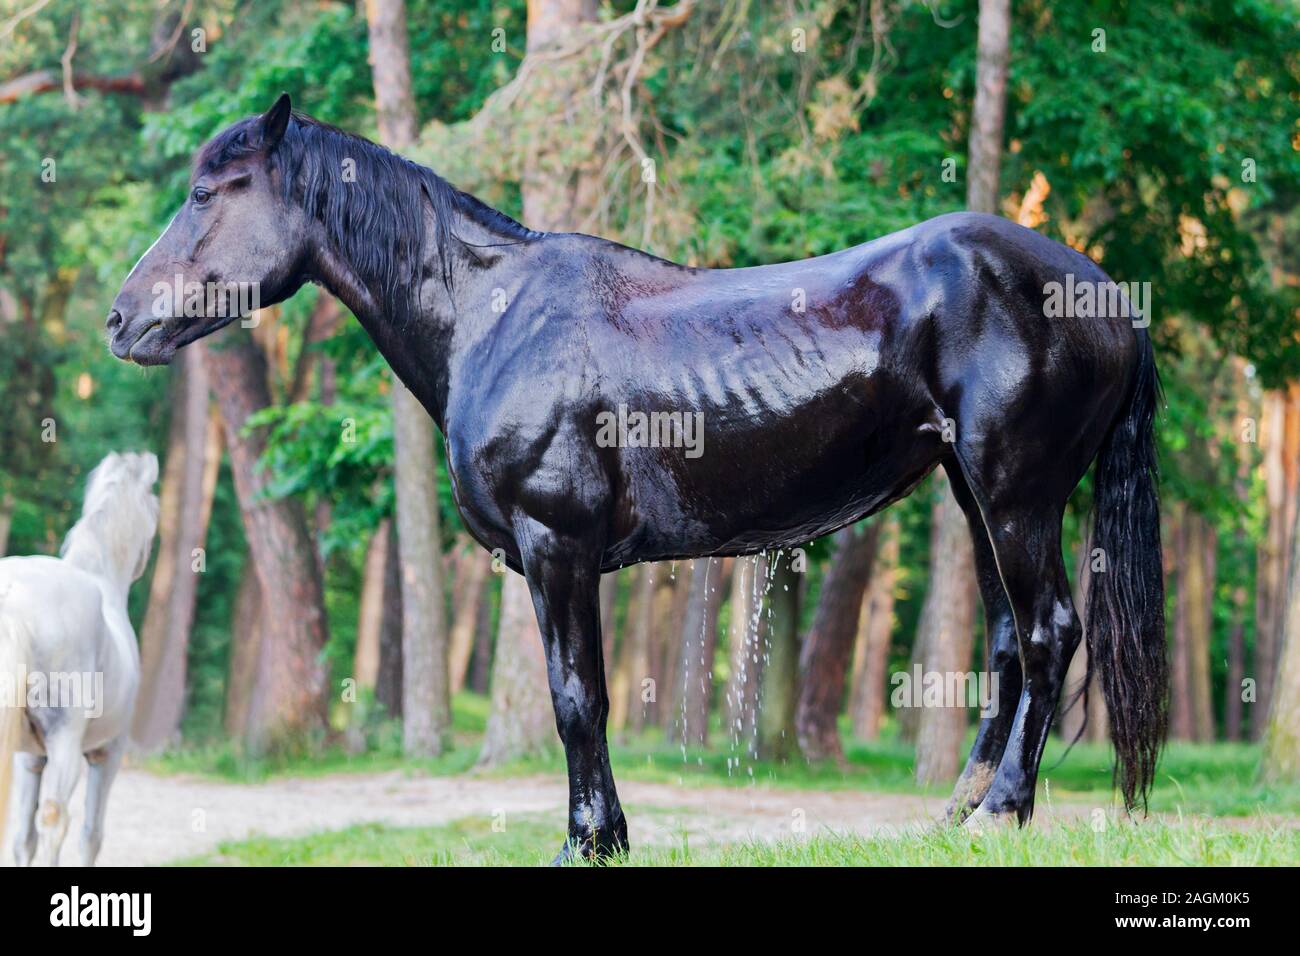 black horse dries in the sun after bathing Stock Photo